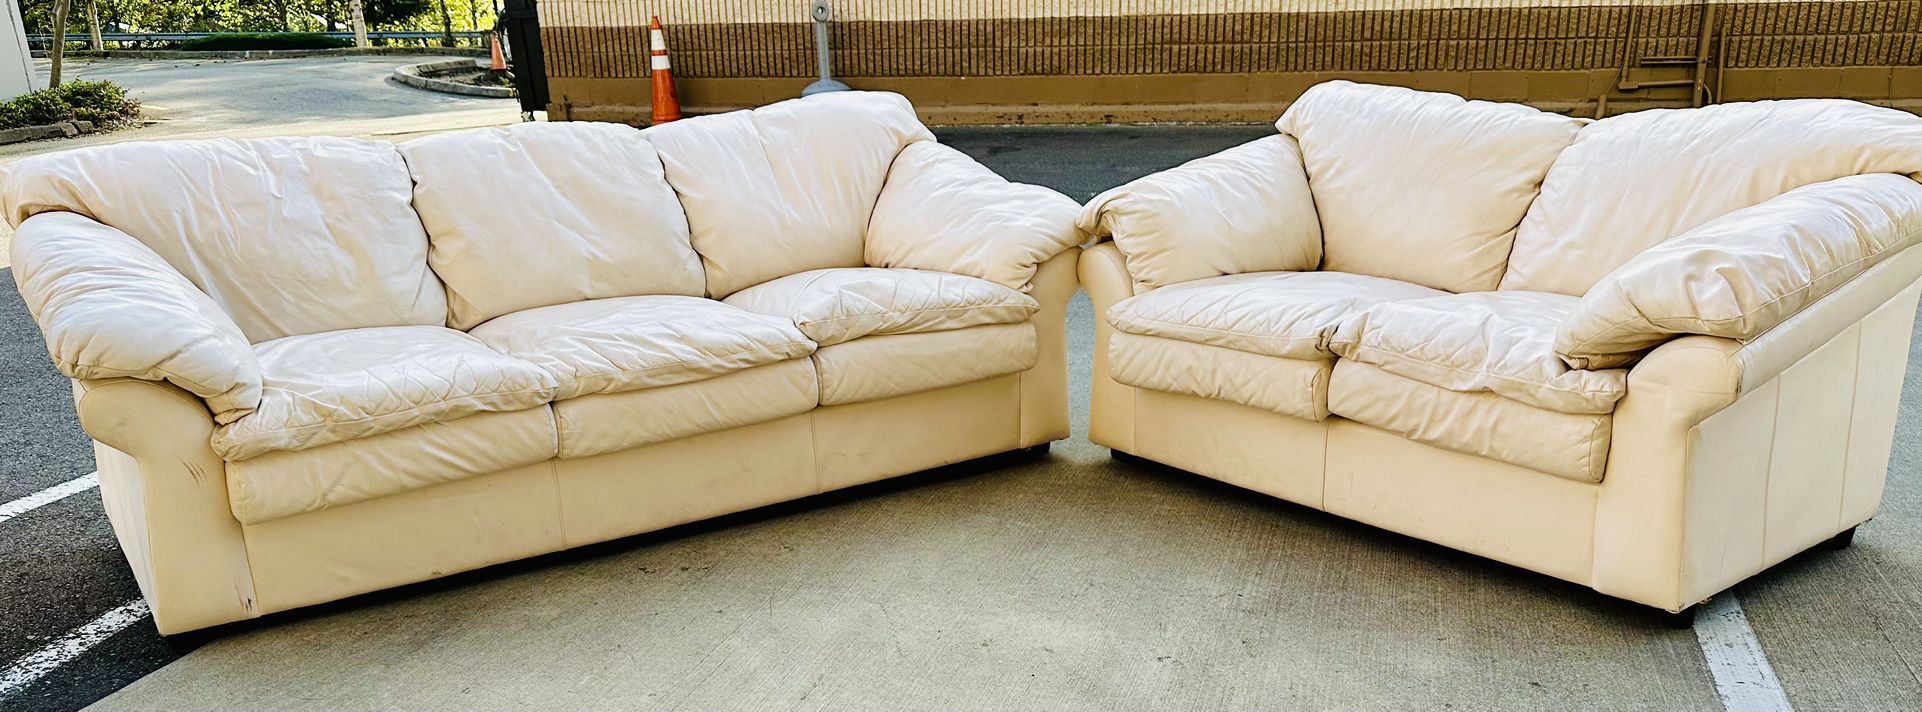 Couch Leather Beige